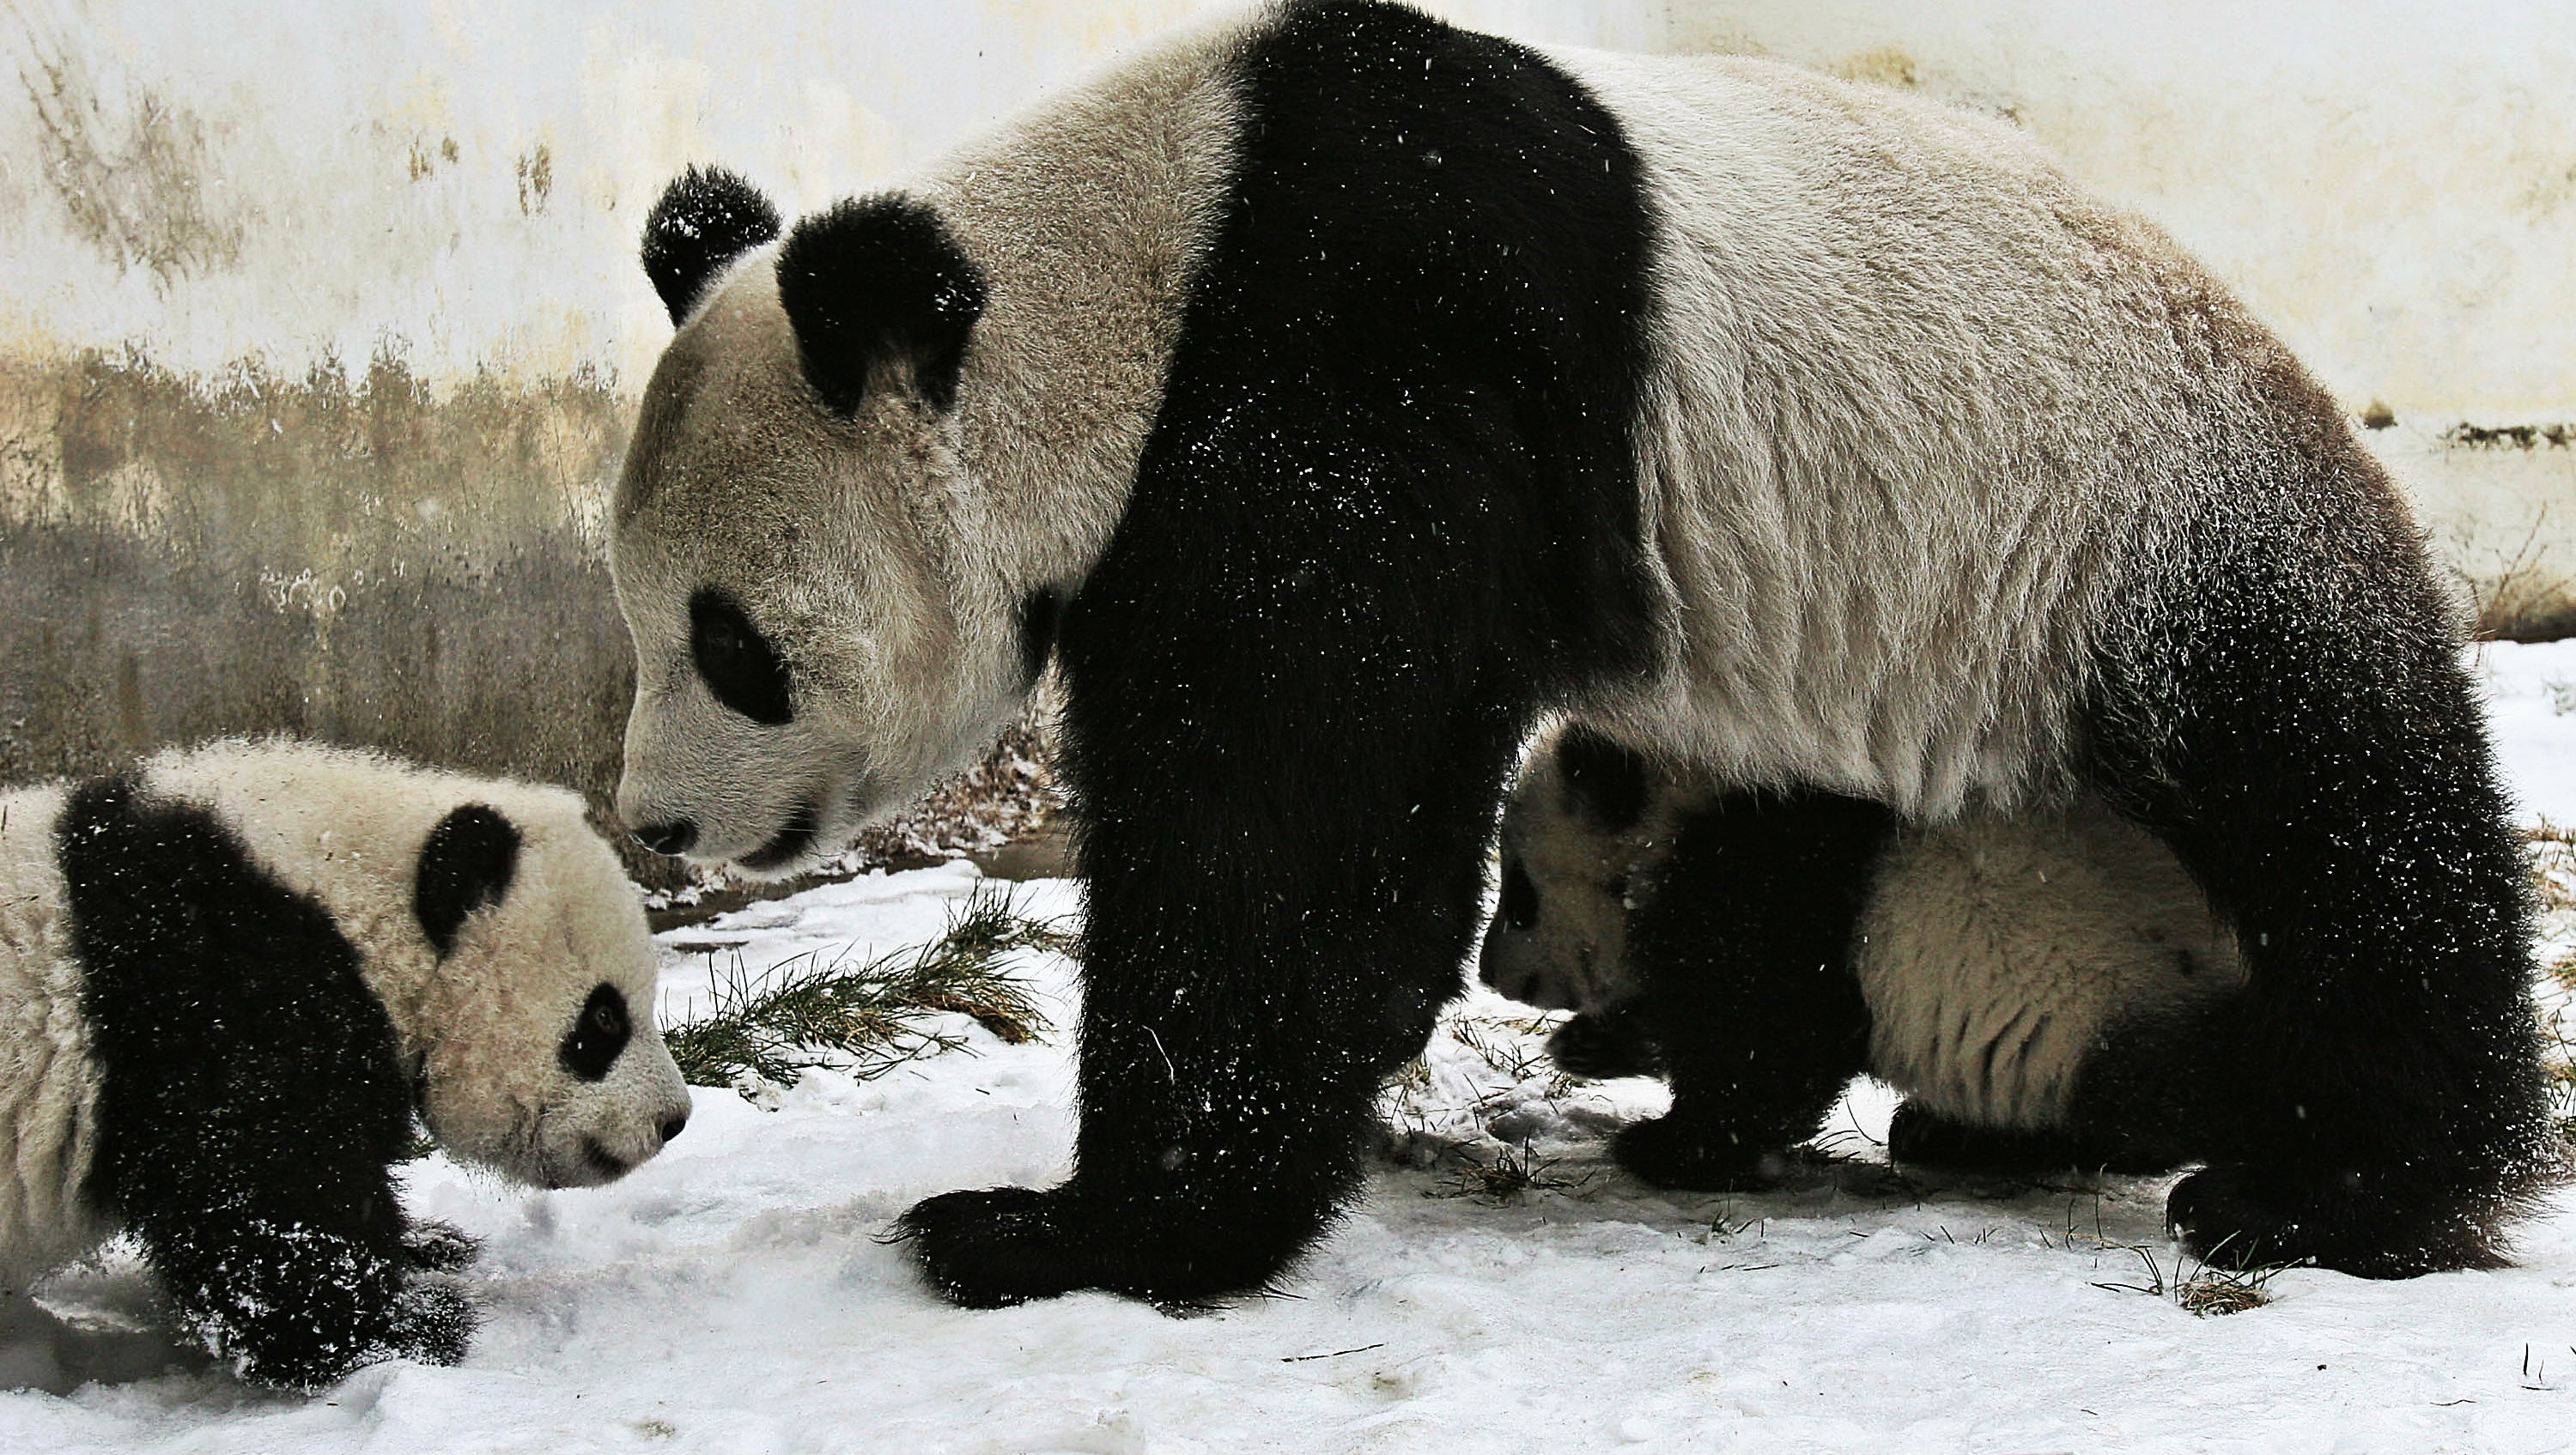 Why Are Giant Pandas Black and White? Biologists Offer a New Theory ...